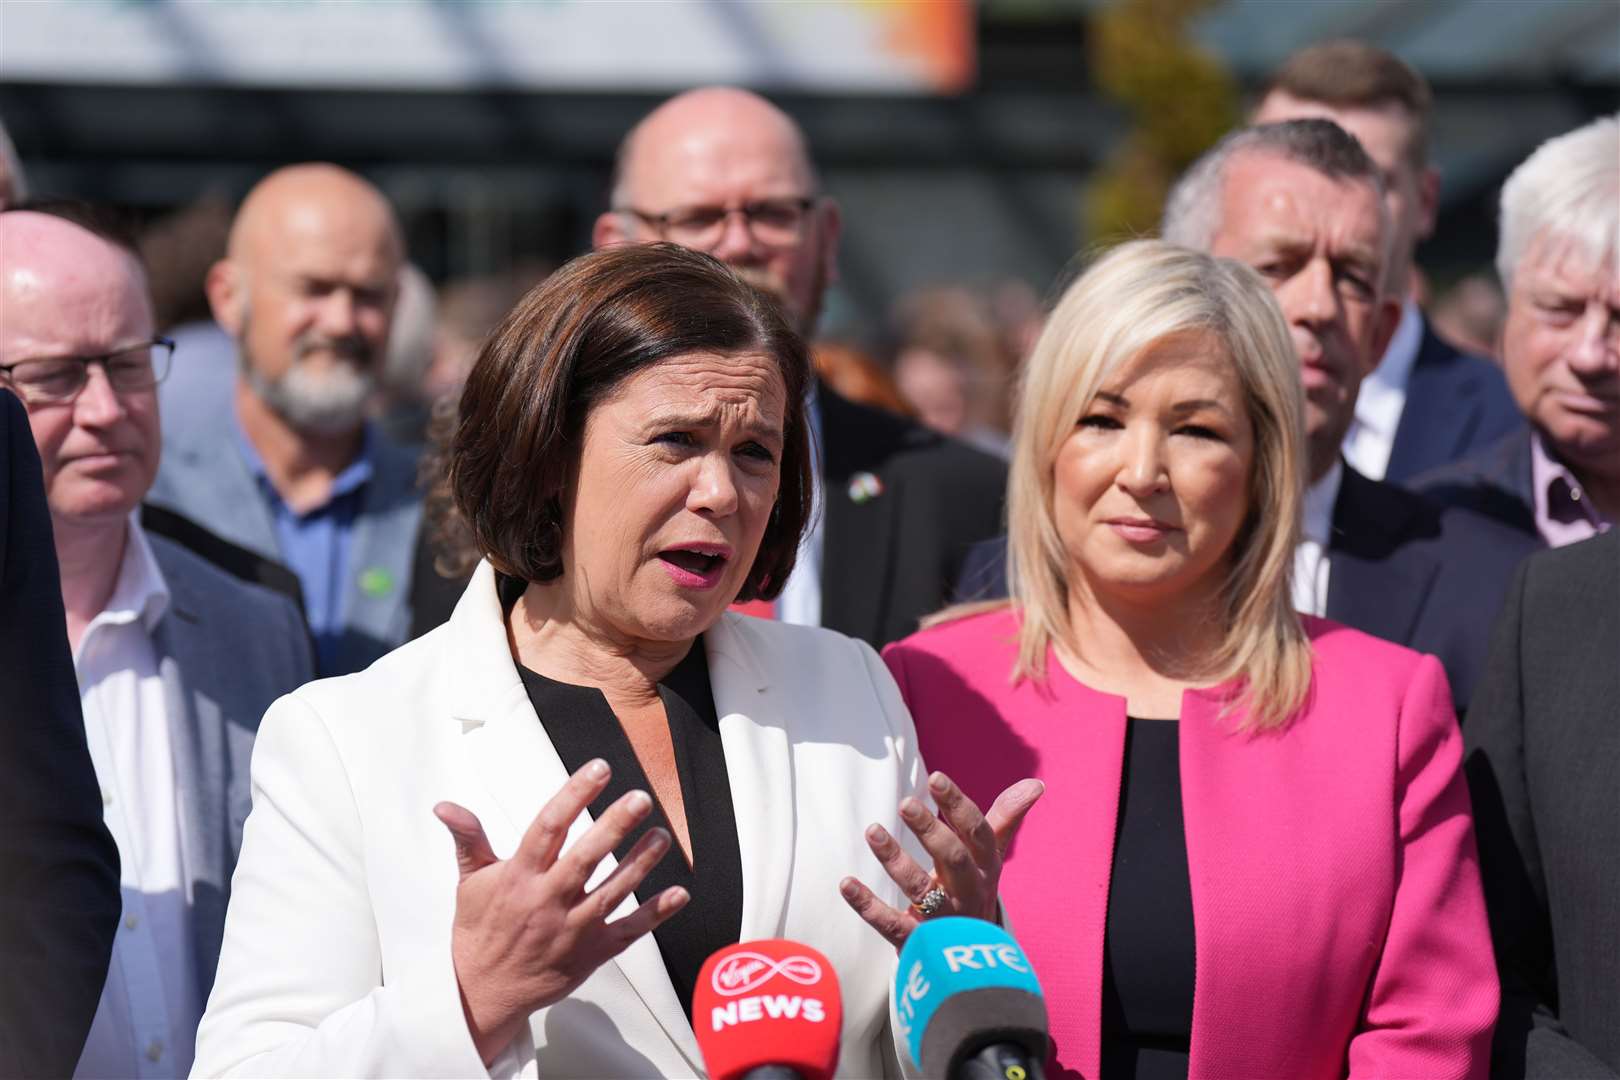 Sinn Fein leader Mary Lou McDonald and Stormont First Minister Michelle O’Neill in Dublin on Sunday (PA)